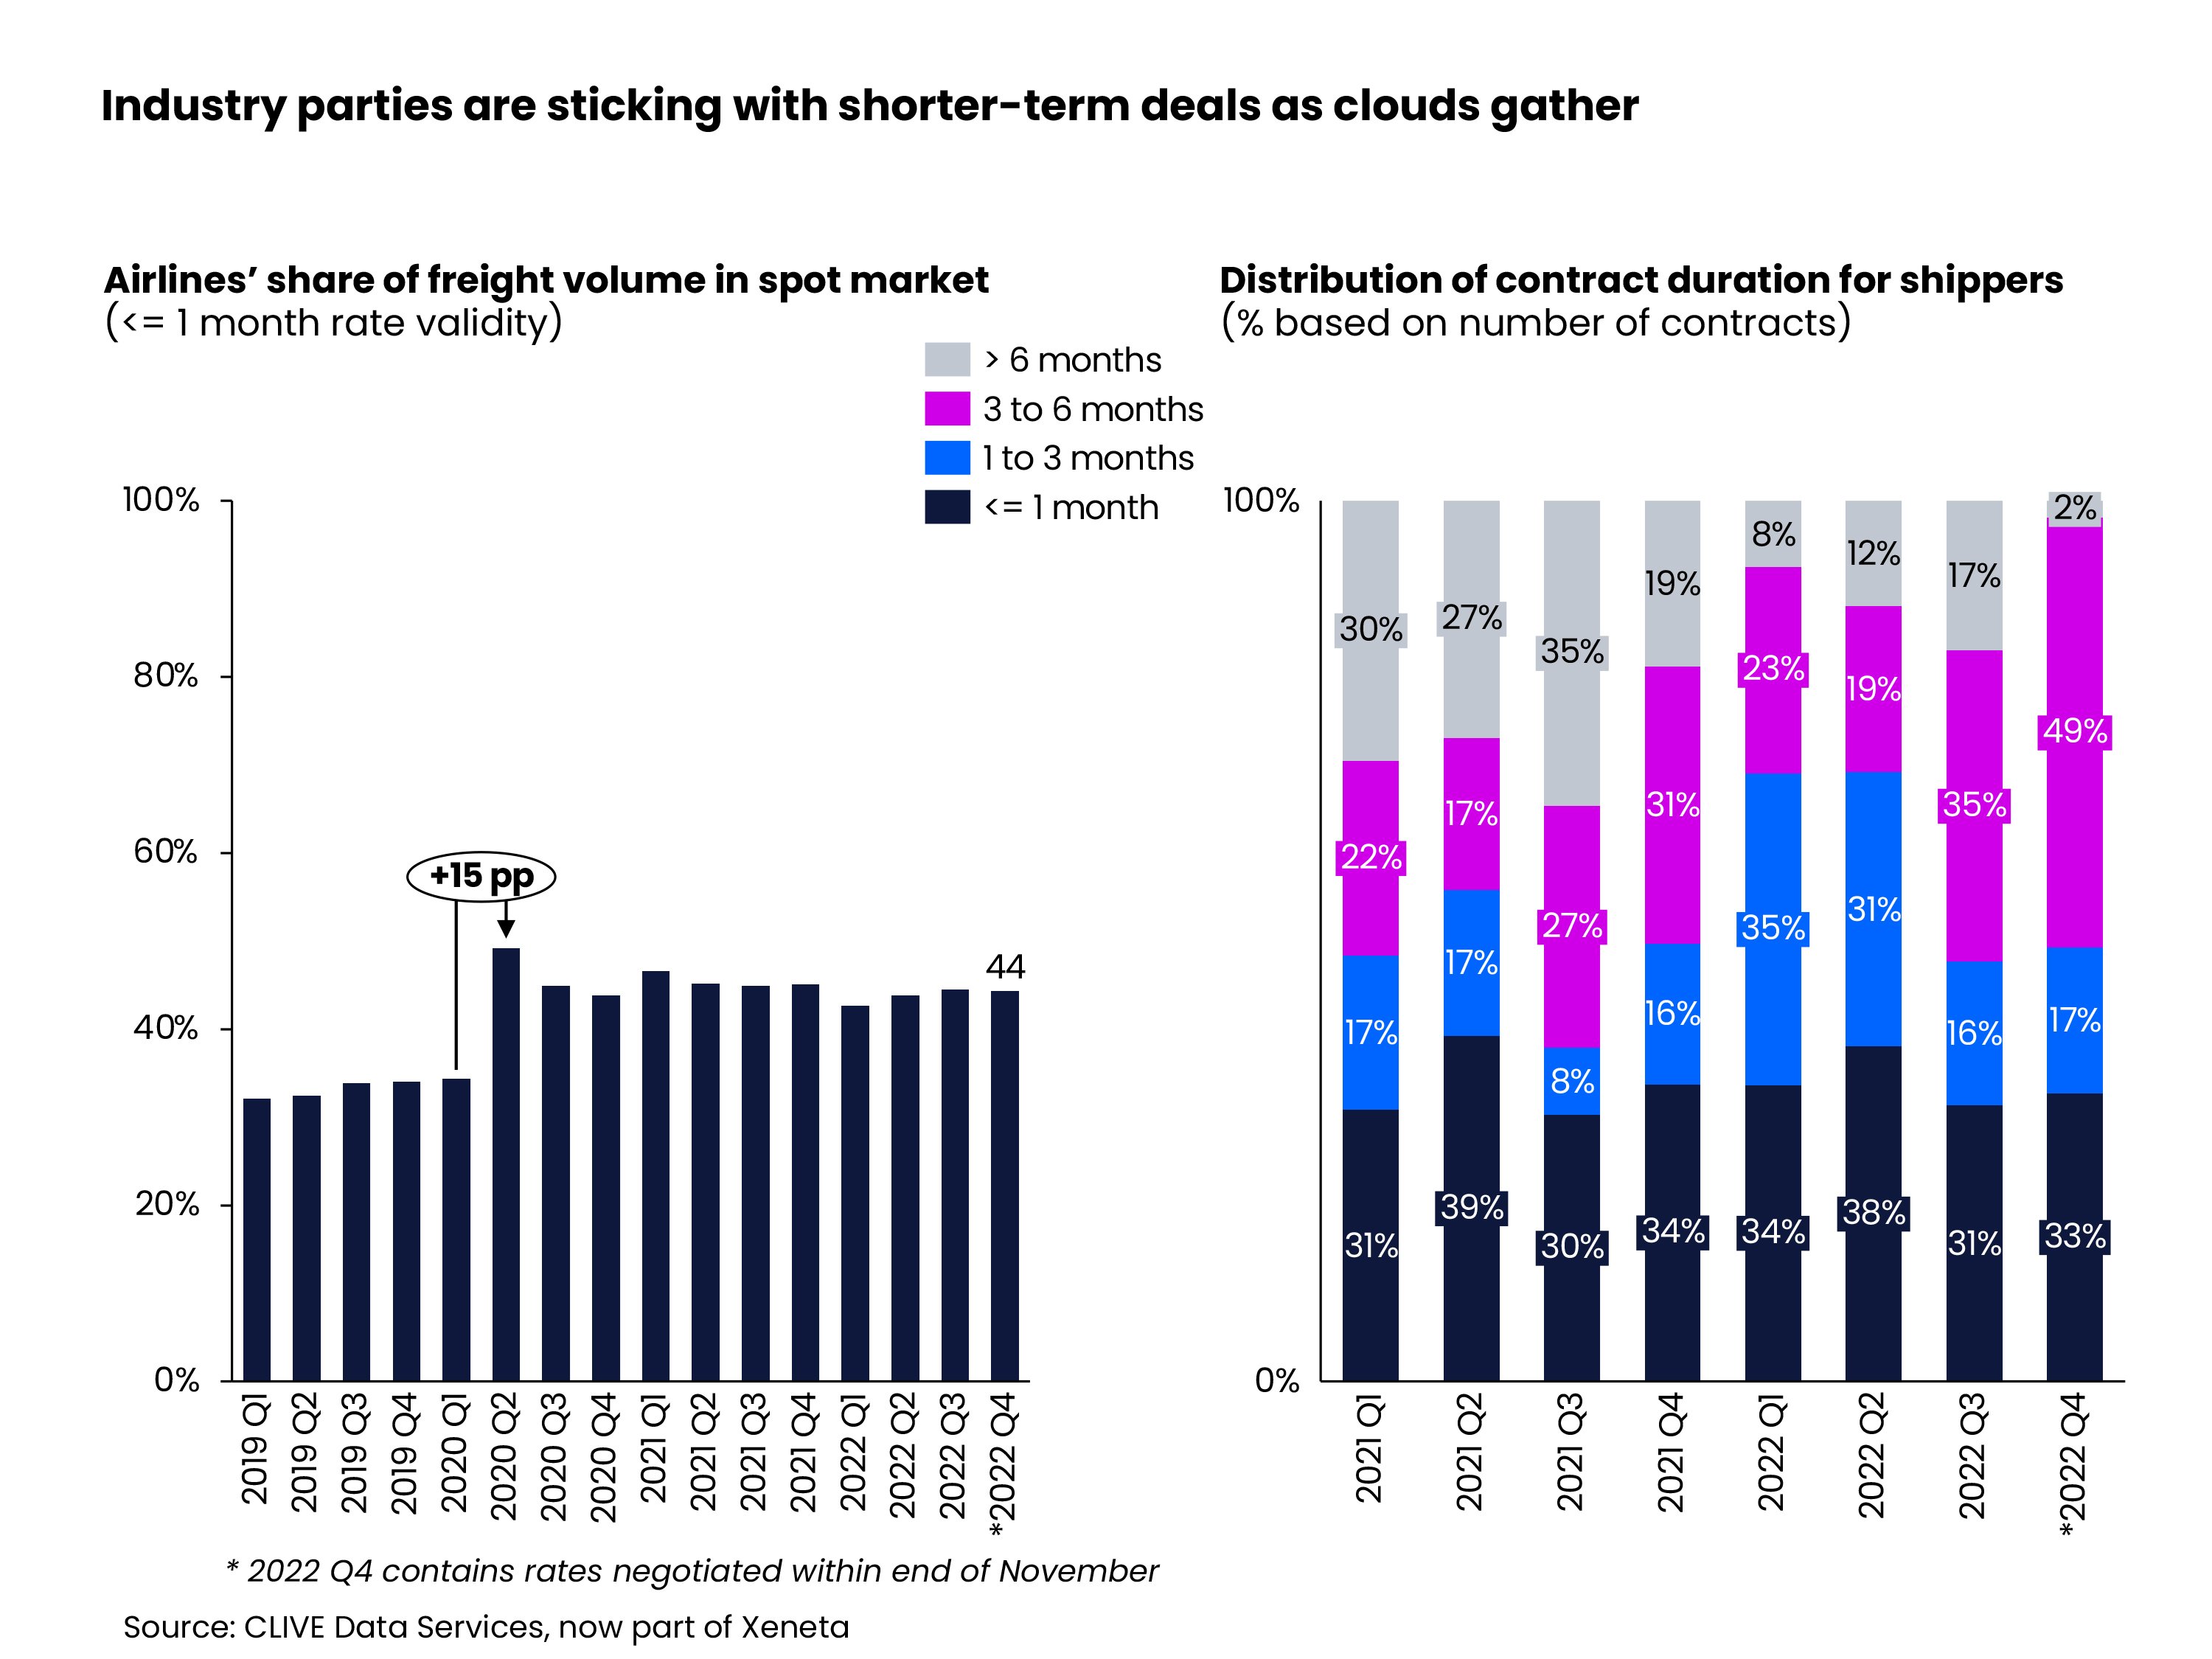 Industry parties are sticking with shorter-term deals as clouds gather